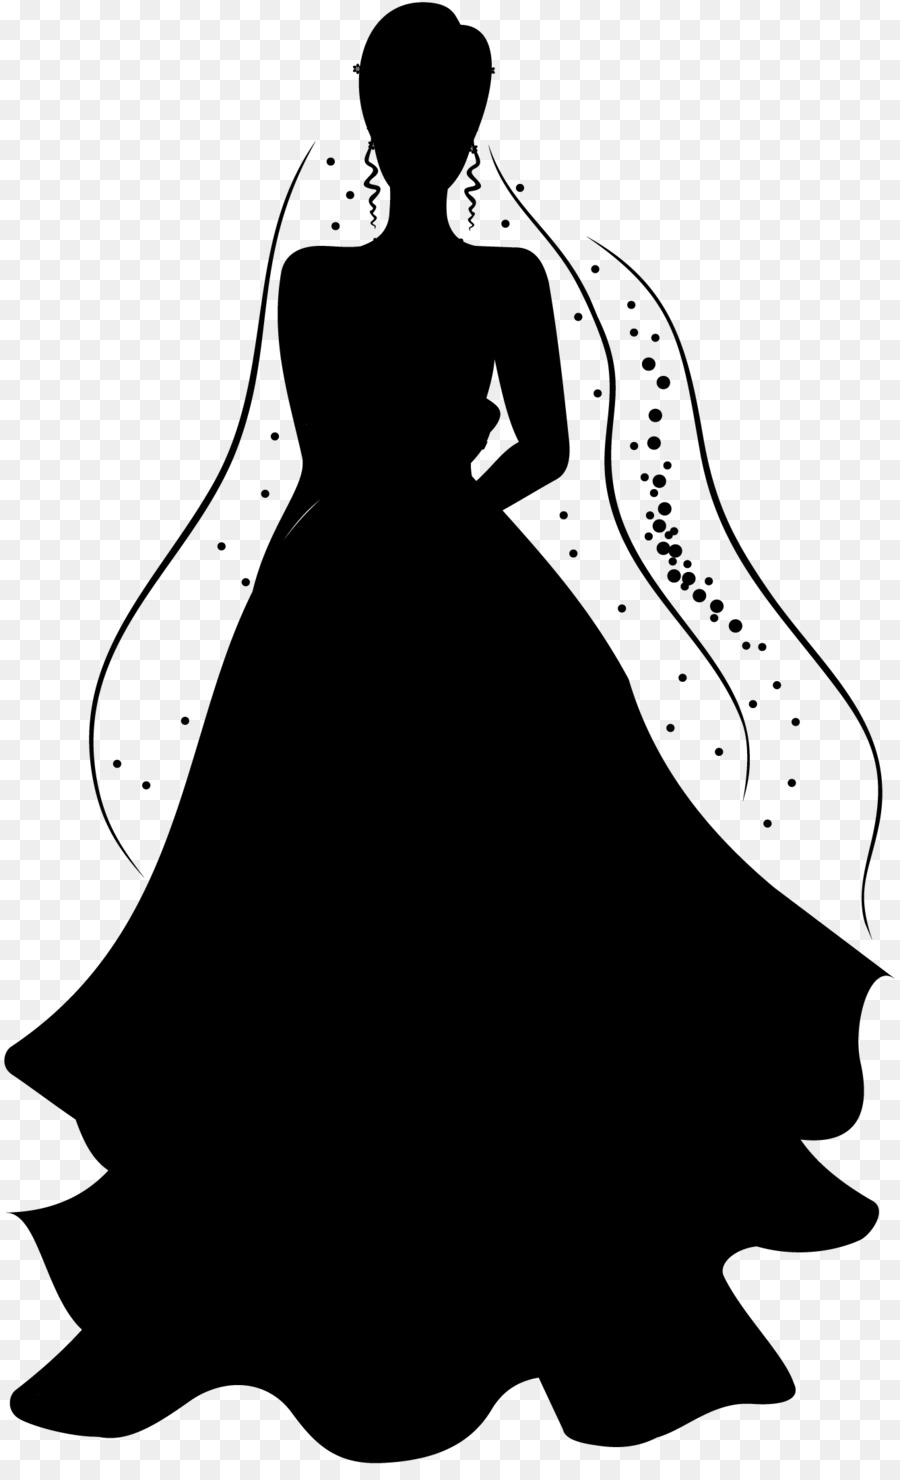 Clip art Illustration Silhouette Black & White - M Gown -  png download - 1336*2182 - Free Transparent Silhouette png Download.